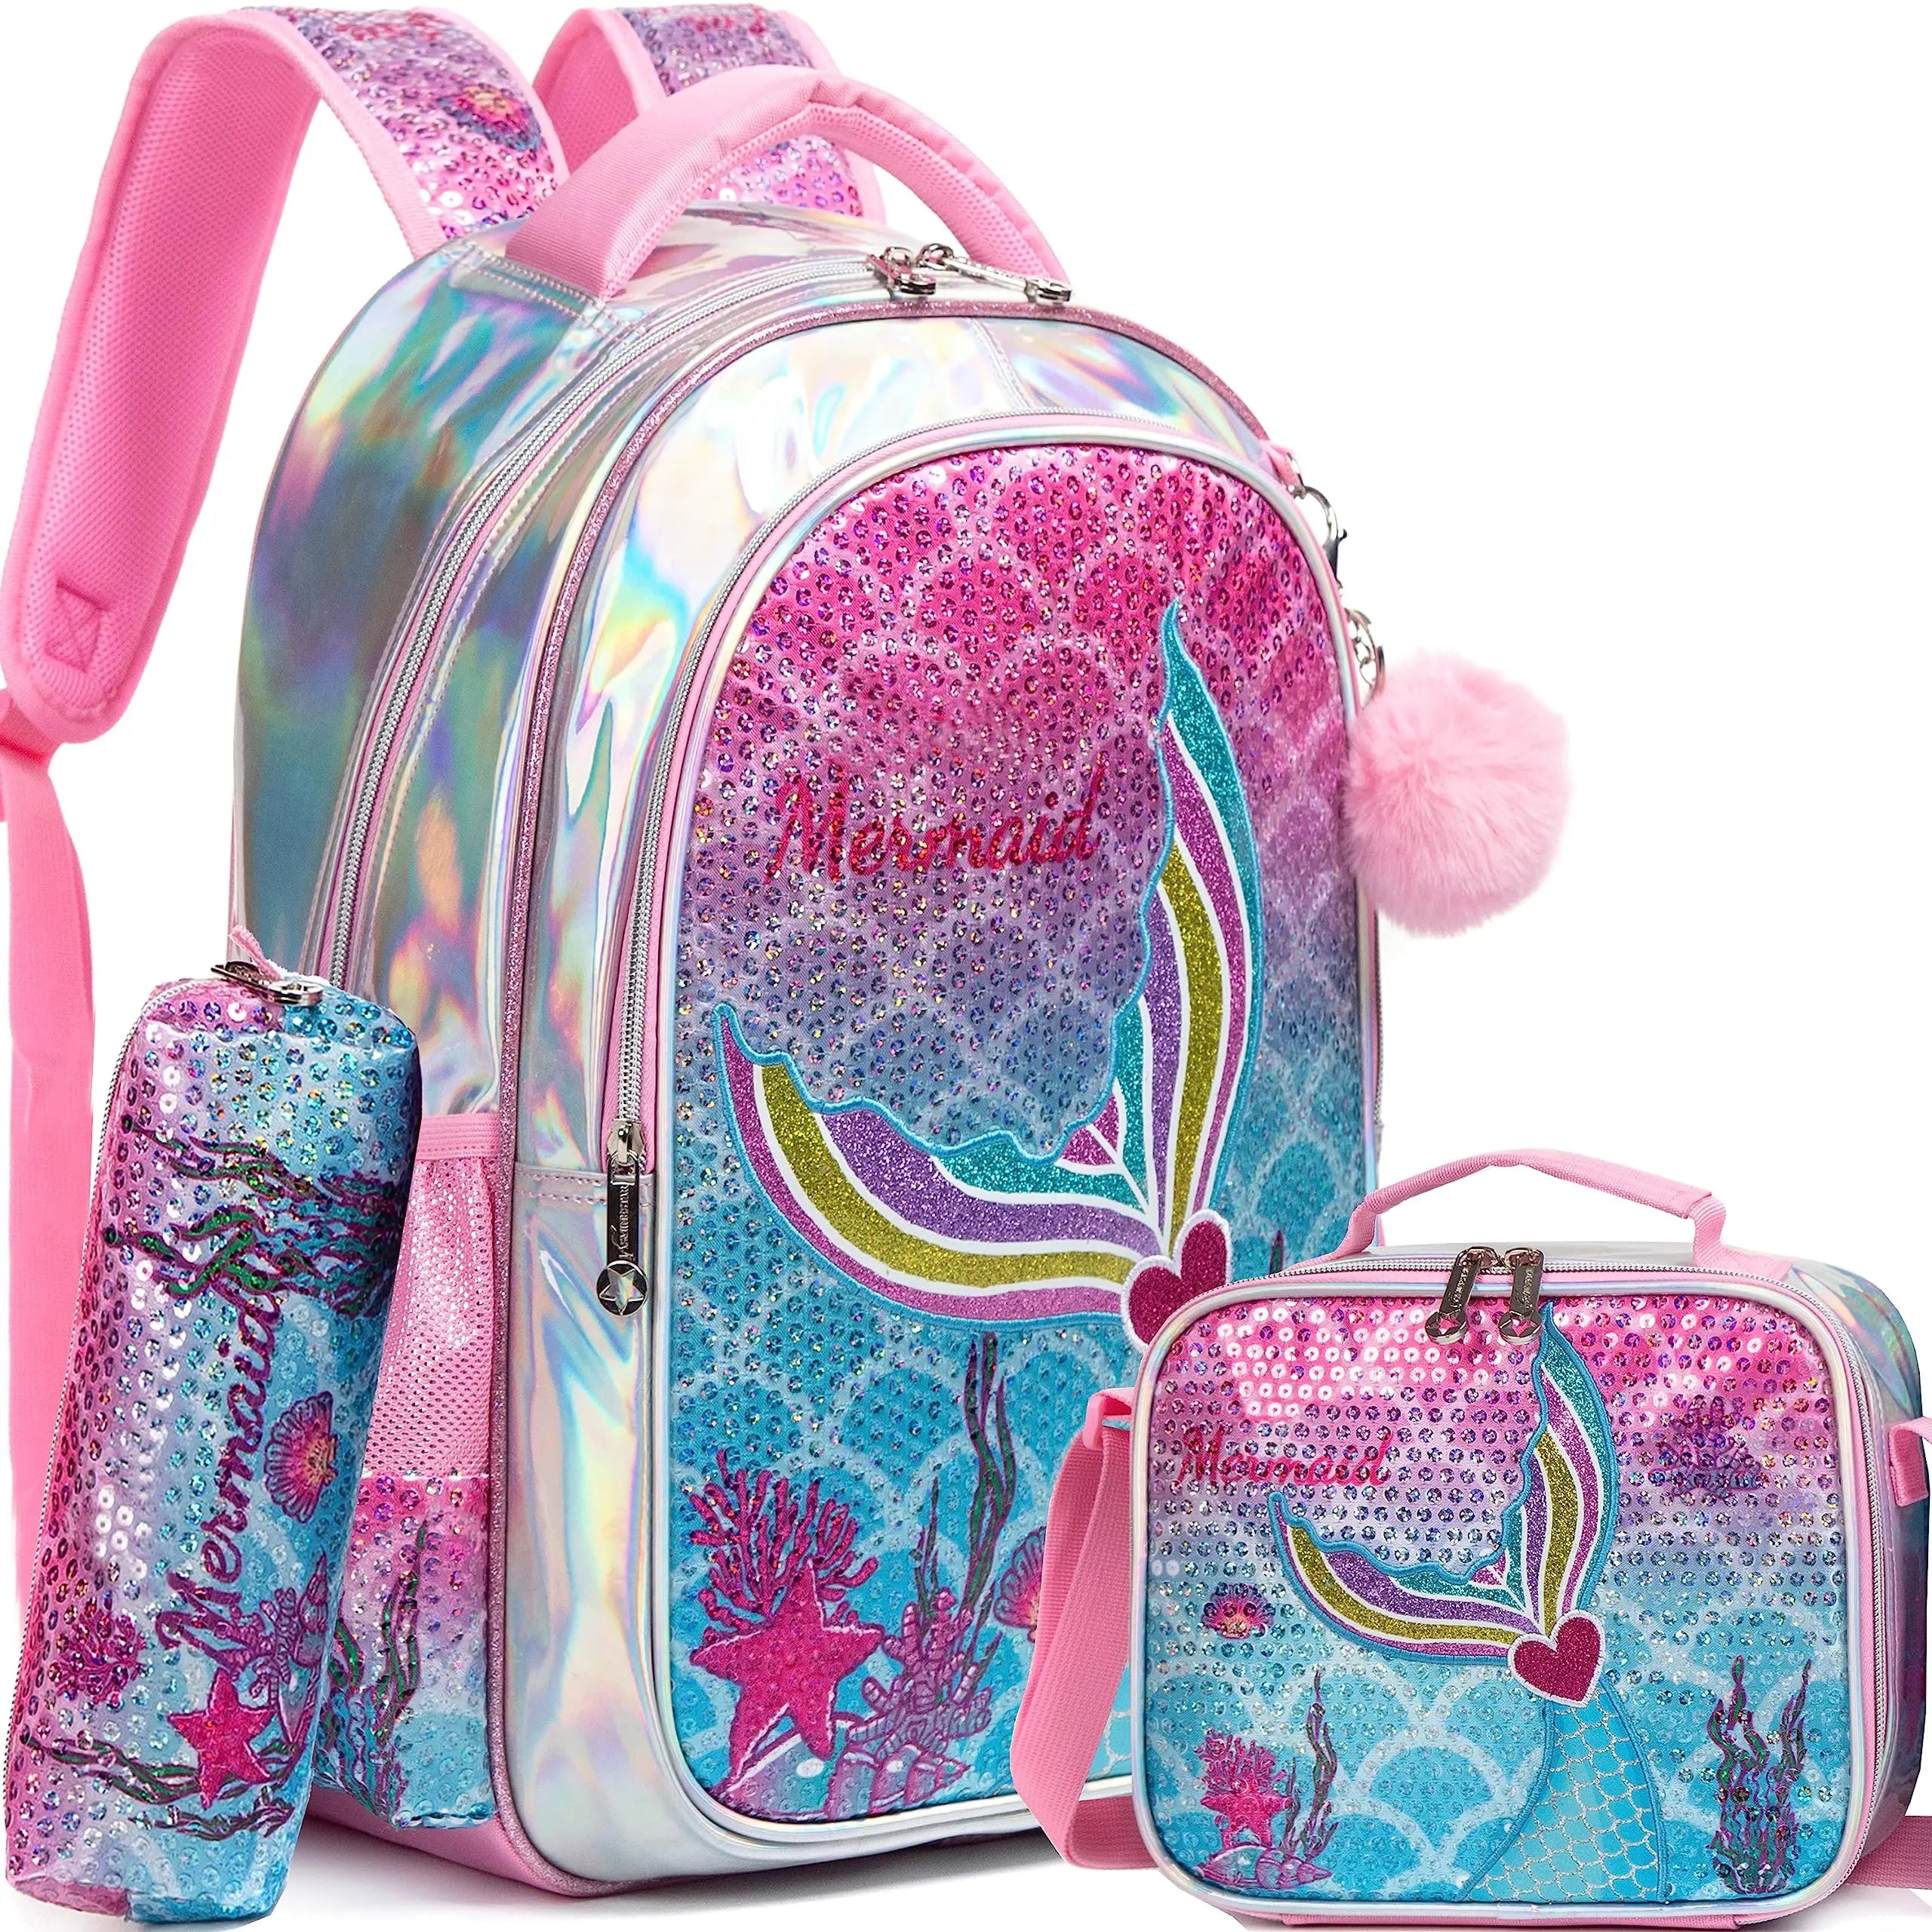 Meetbelify Mermaid Backpack Set for Girls - School Bag with Lunch Box, Ideal for Elementary Students (Ages 5-8) Pink